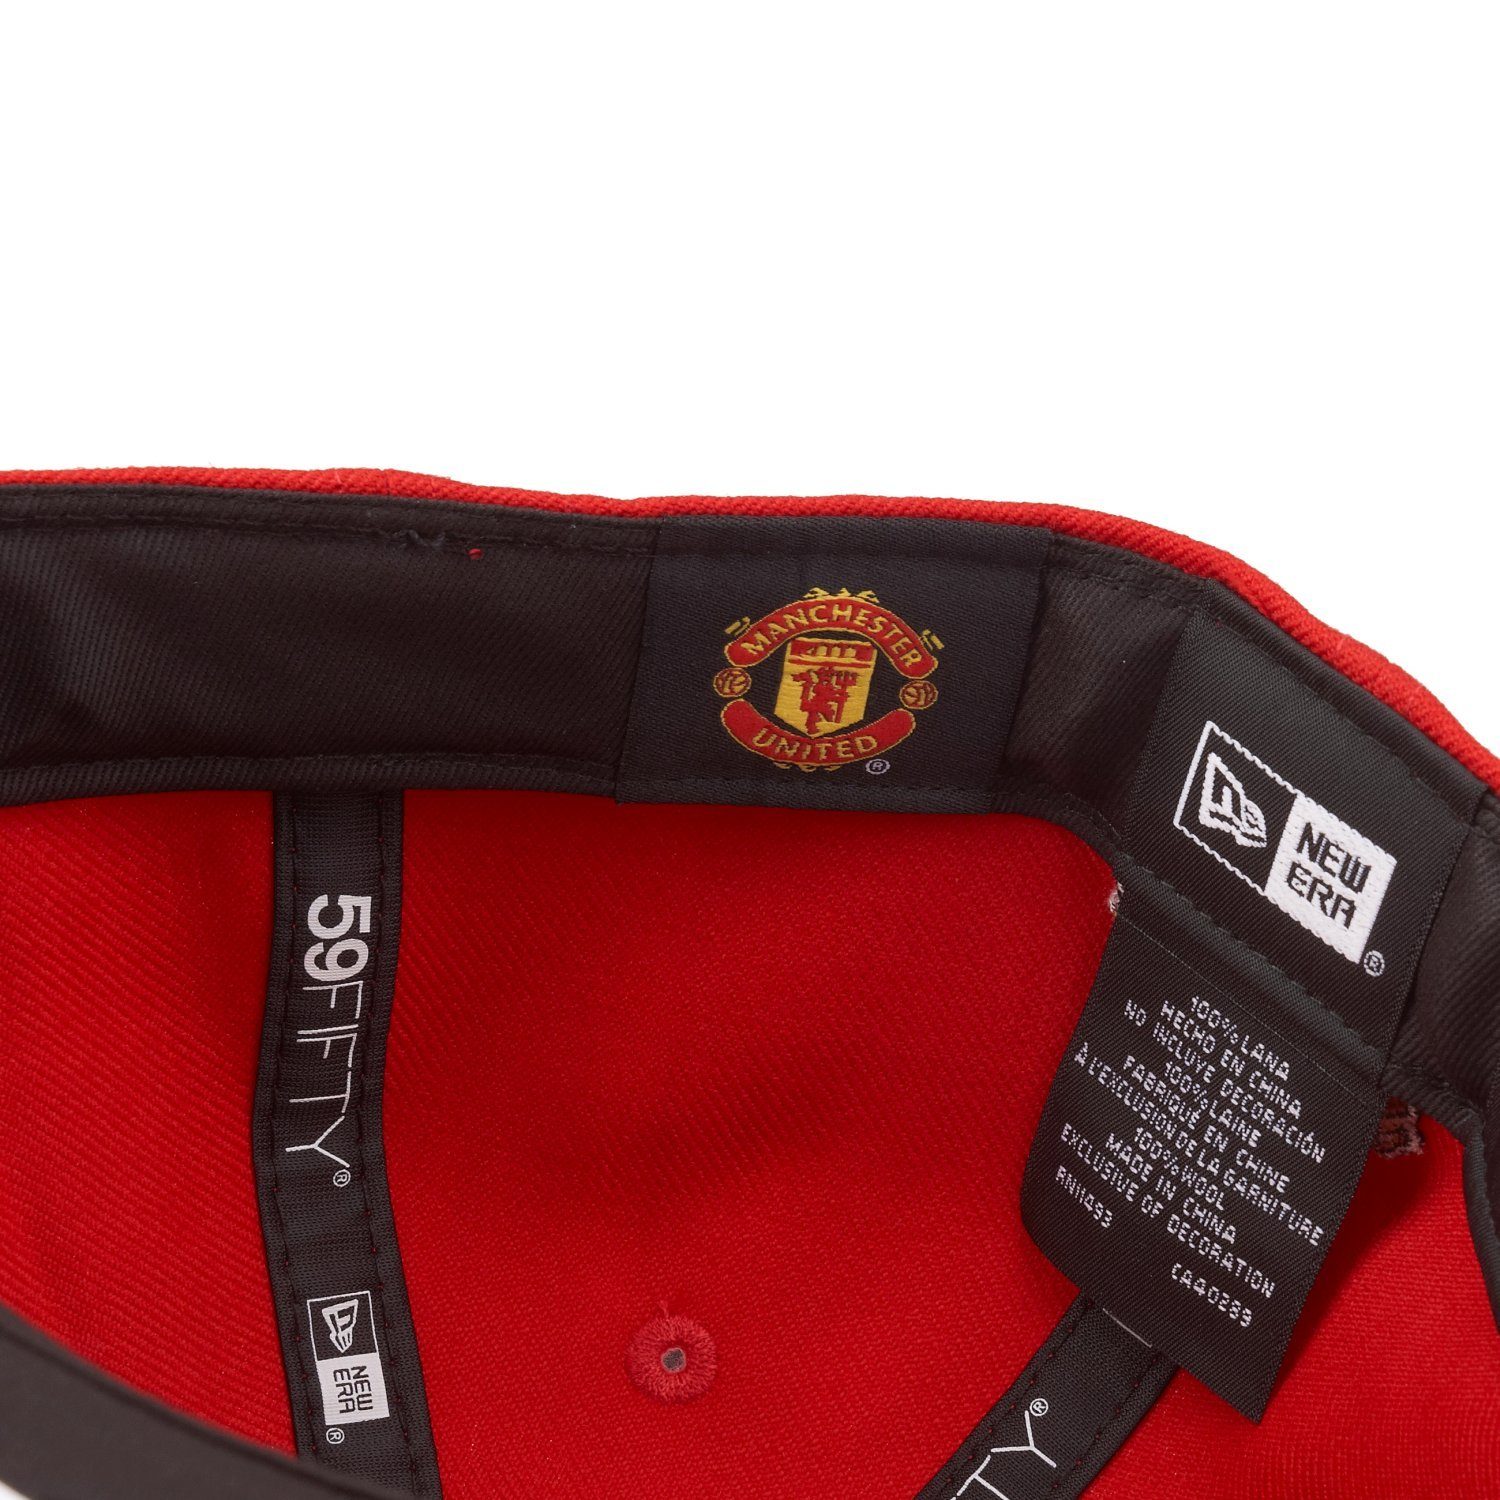 DEVIL Manchester New United Cap 59Fifty Era Fitted